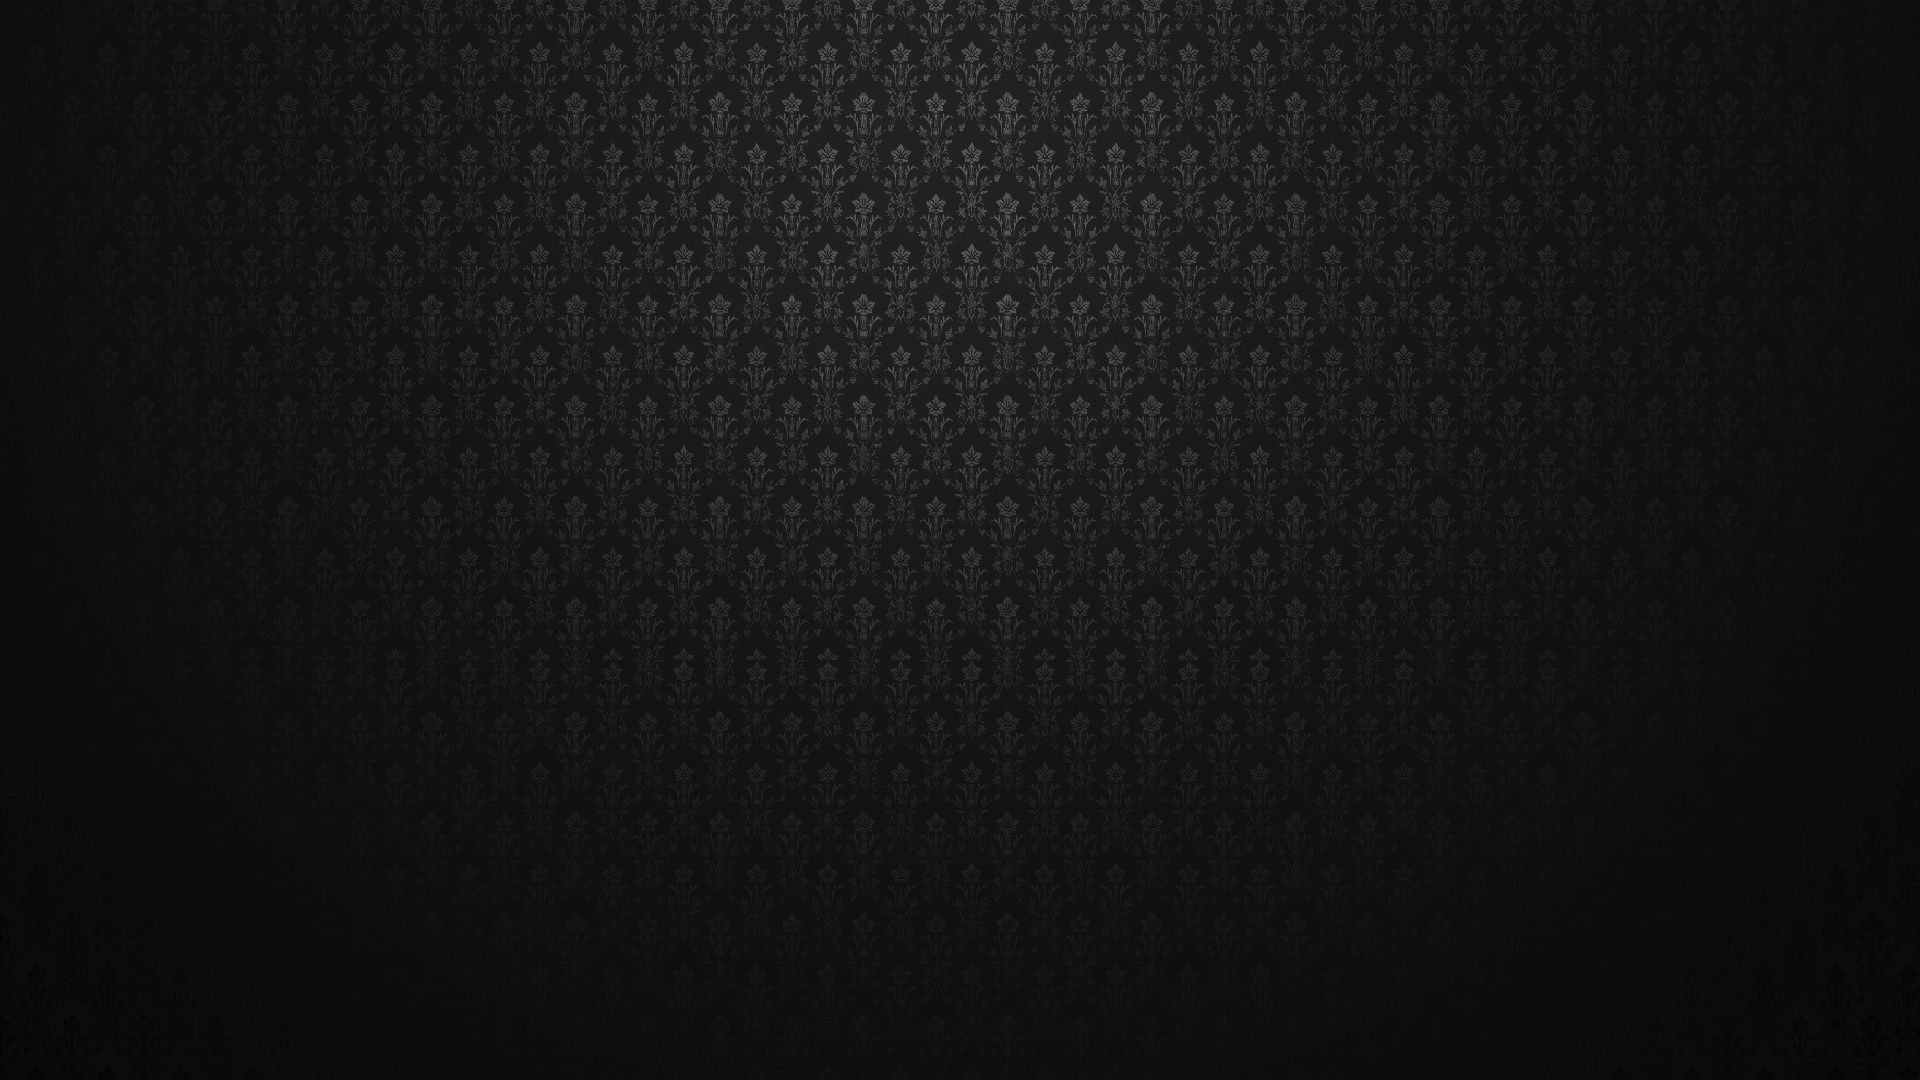 Stunning Solid Black Backgrounds for Your Device - Download Now!